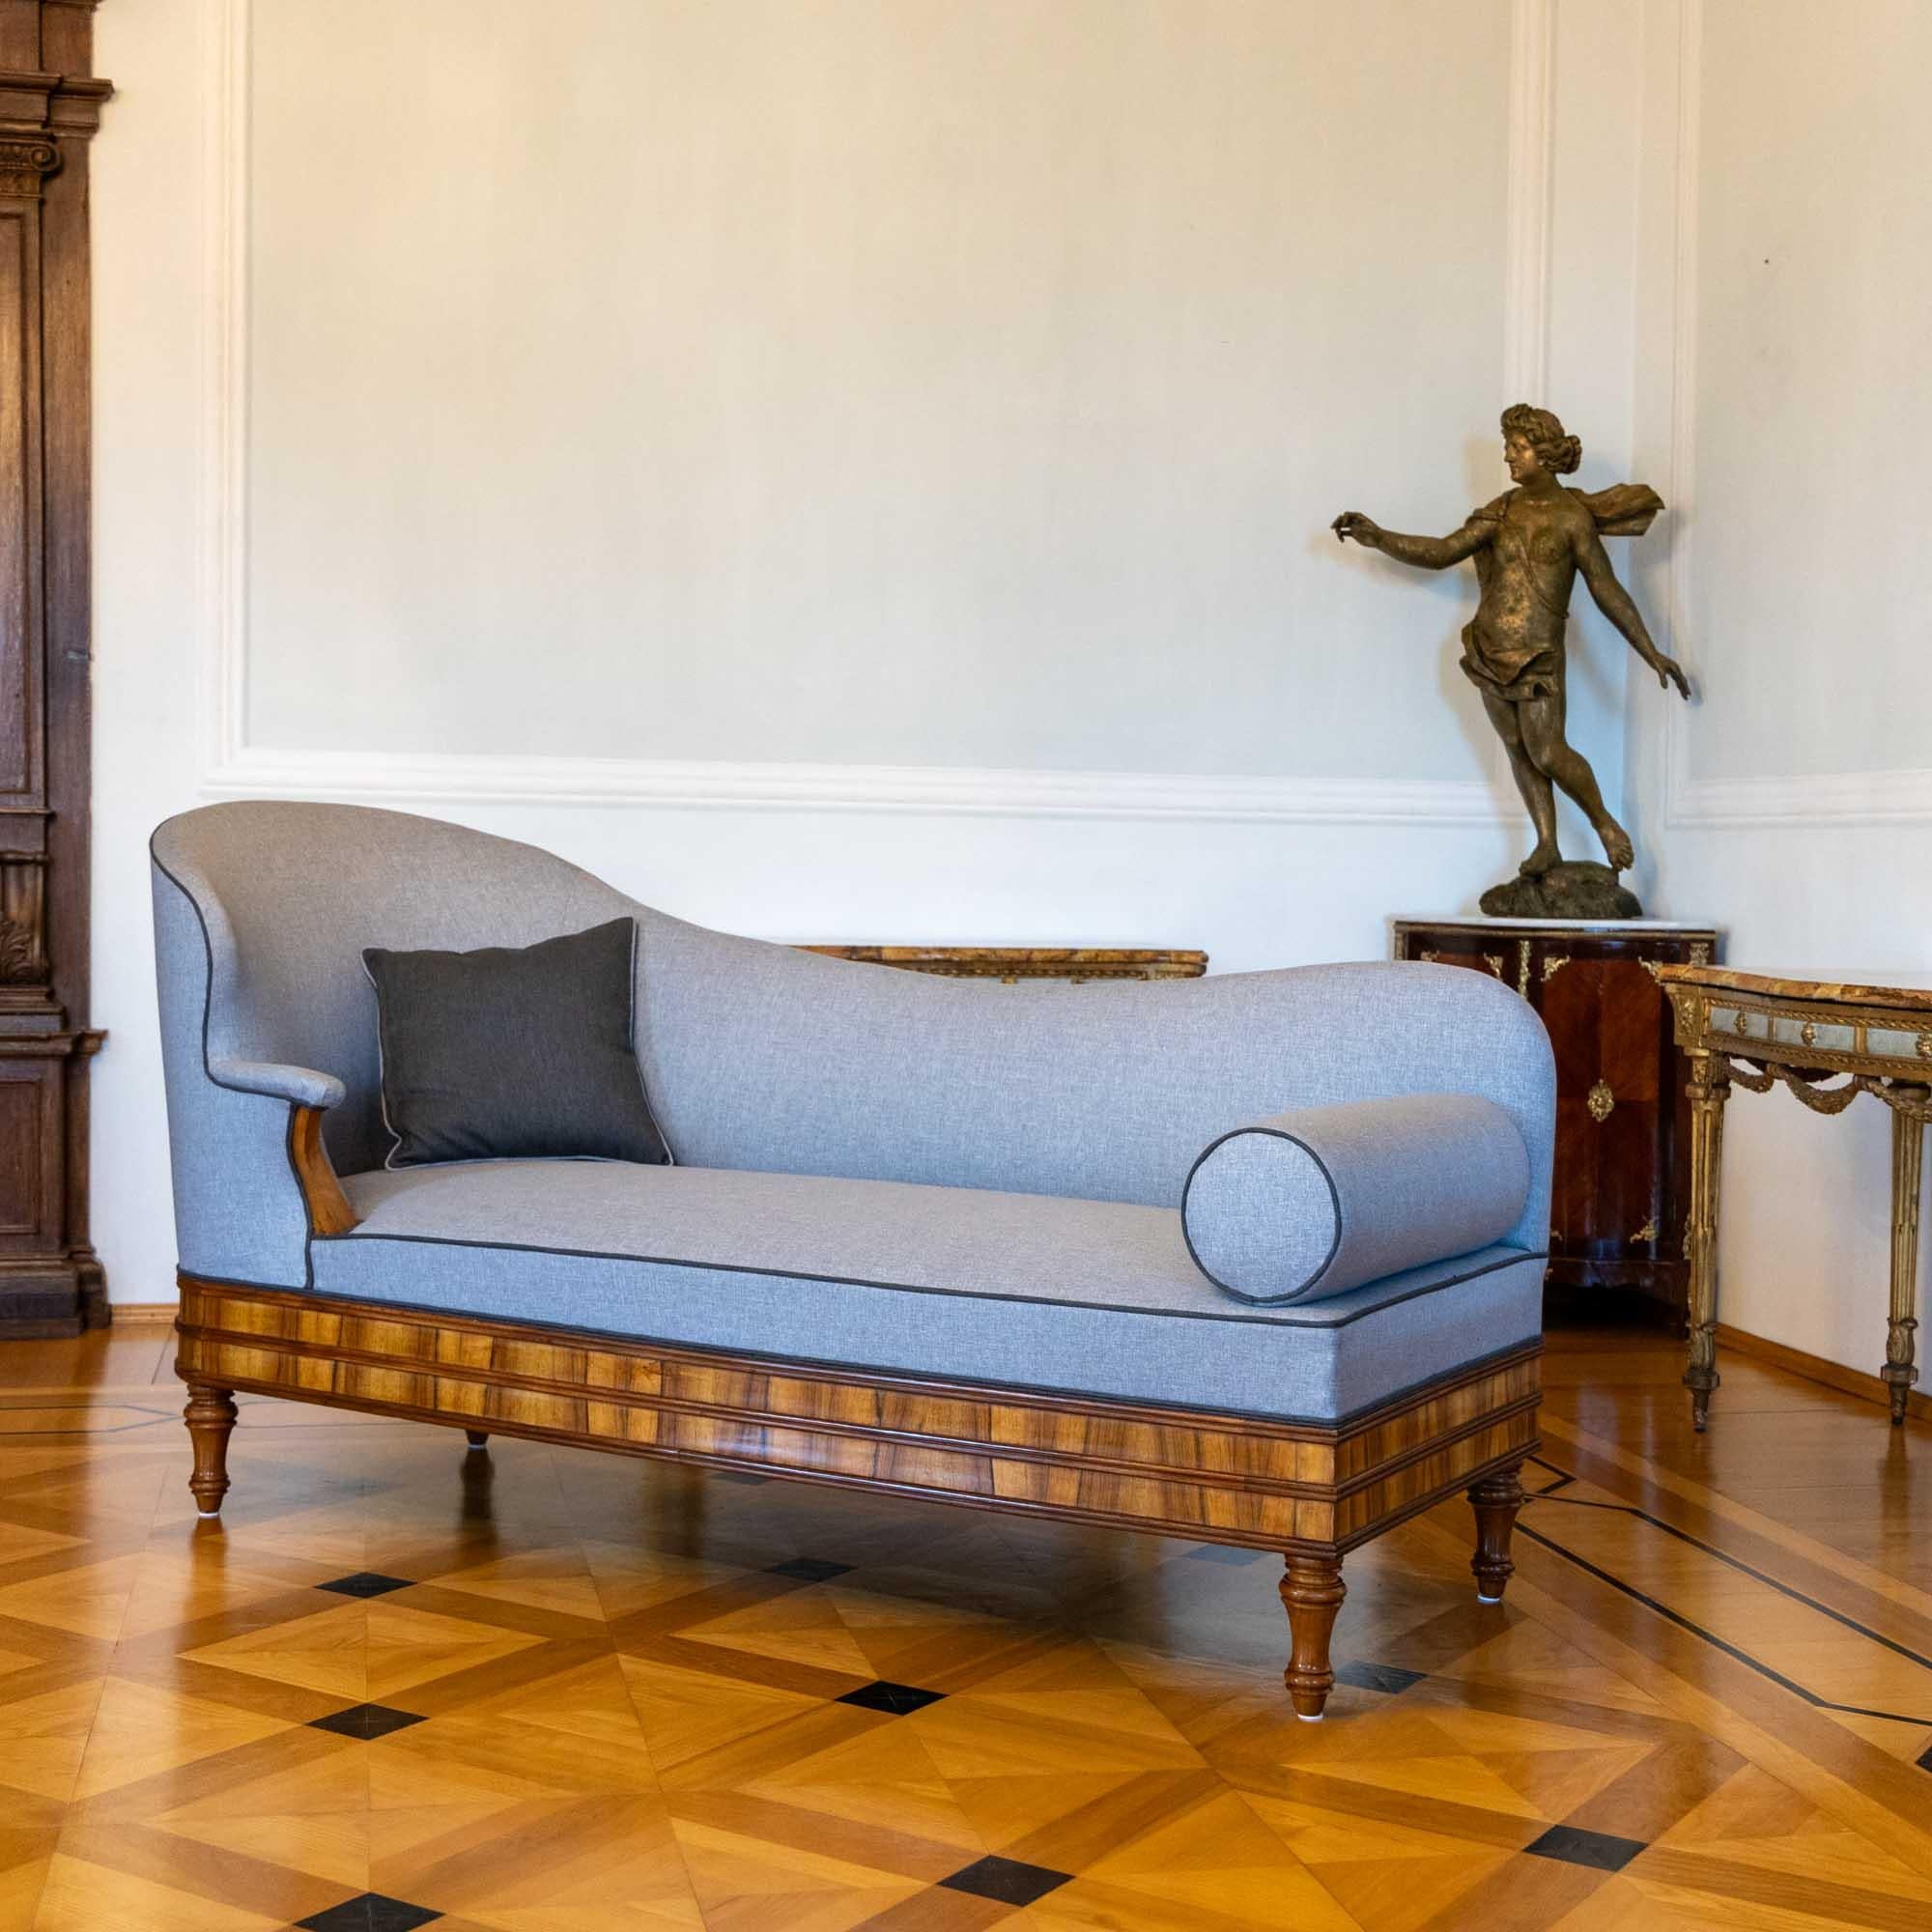 Large recamiere with light gray cover and walnut veneered frame. The straight frame is accentuated with horizontal profile strips and rests on baluster feet. The recamiere has an elegant character and has been completely polished, reupholstered and